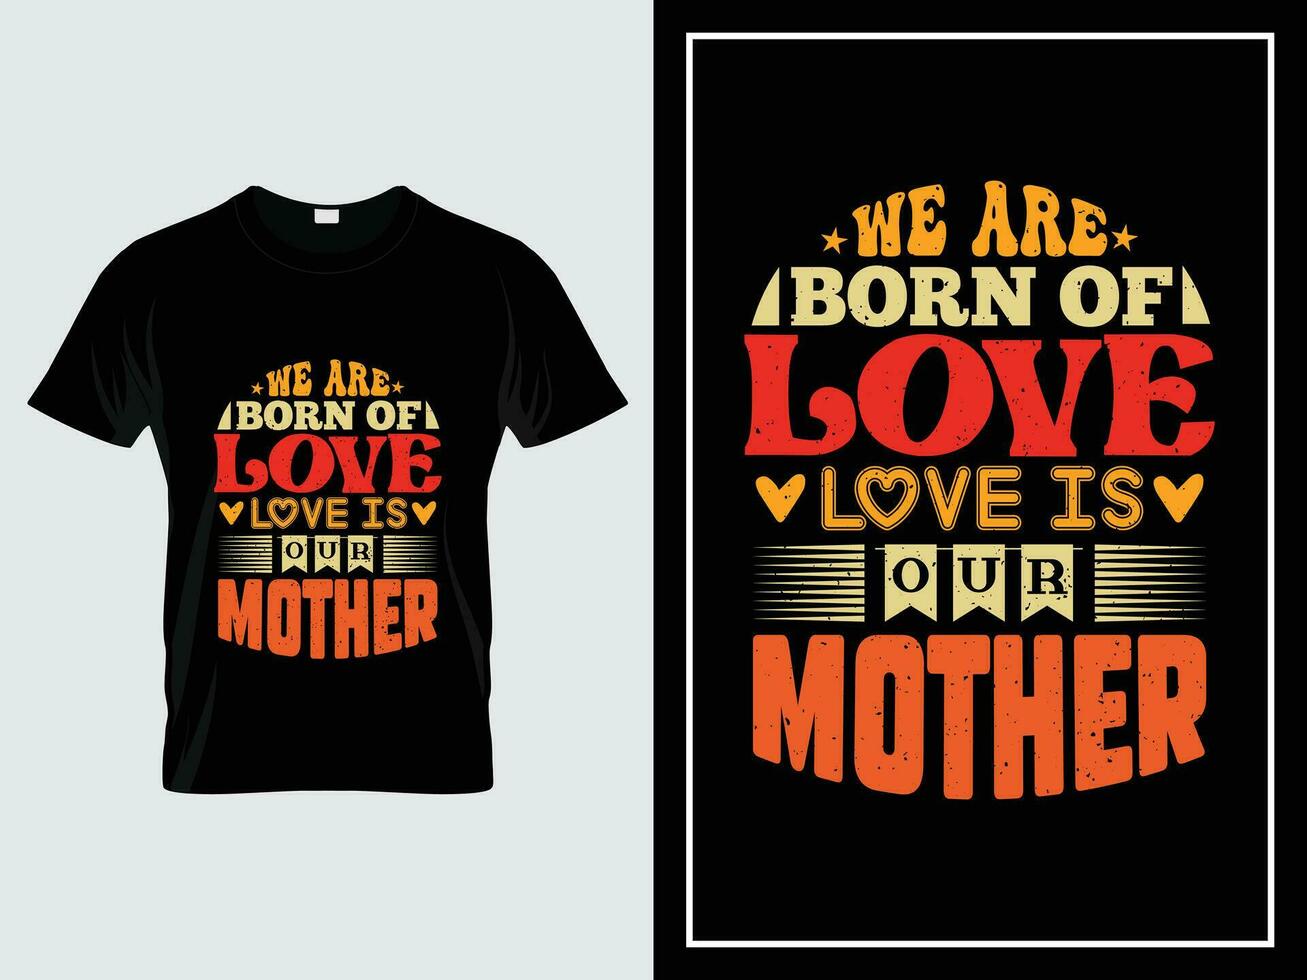 Mom typography t shirt design trendy quote vintage style, We are born of love love is our mother vector